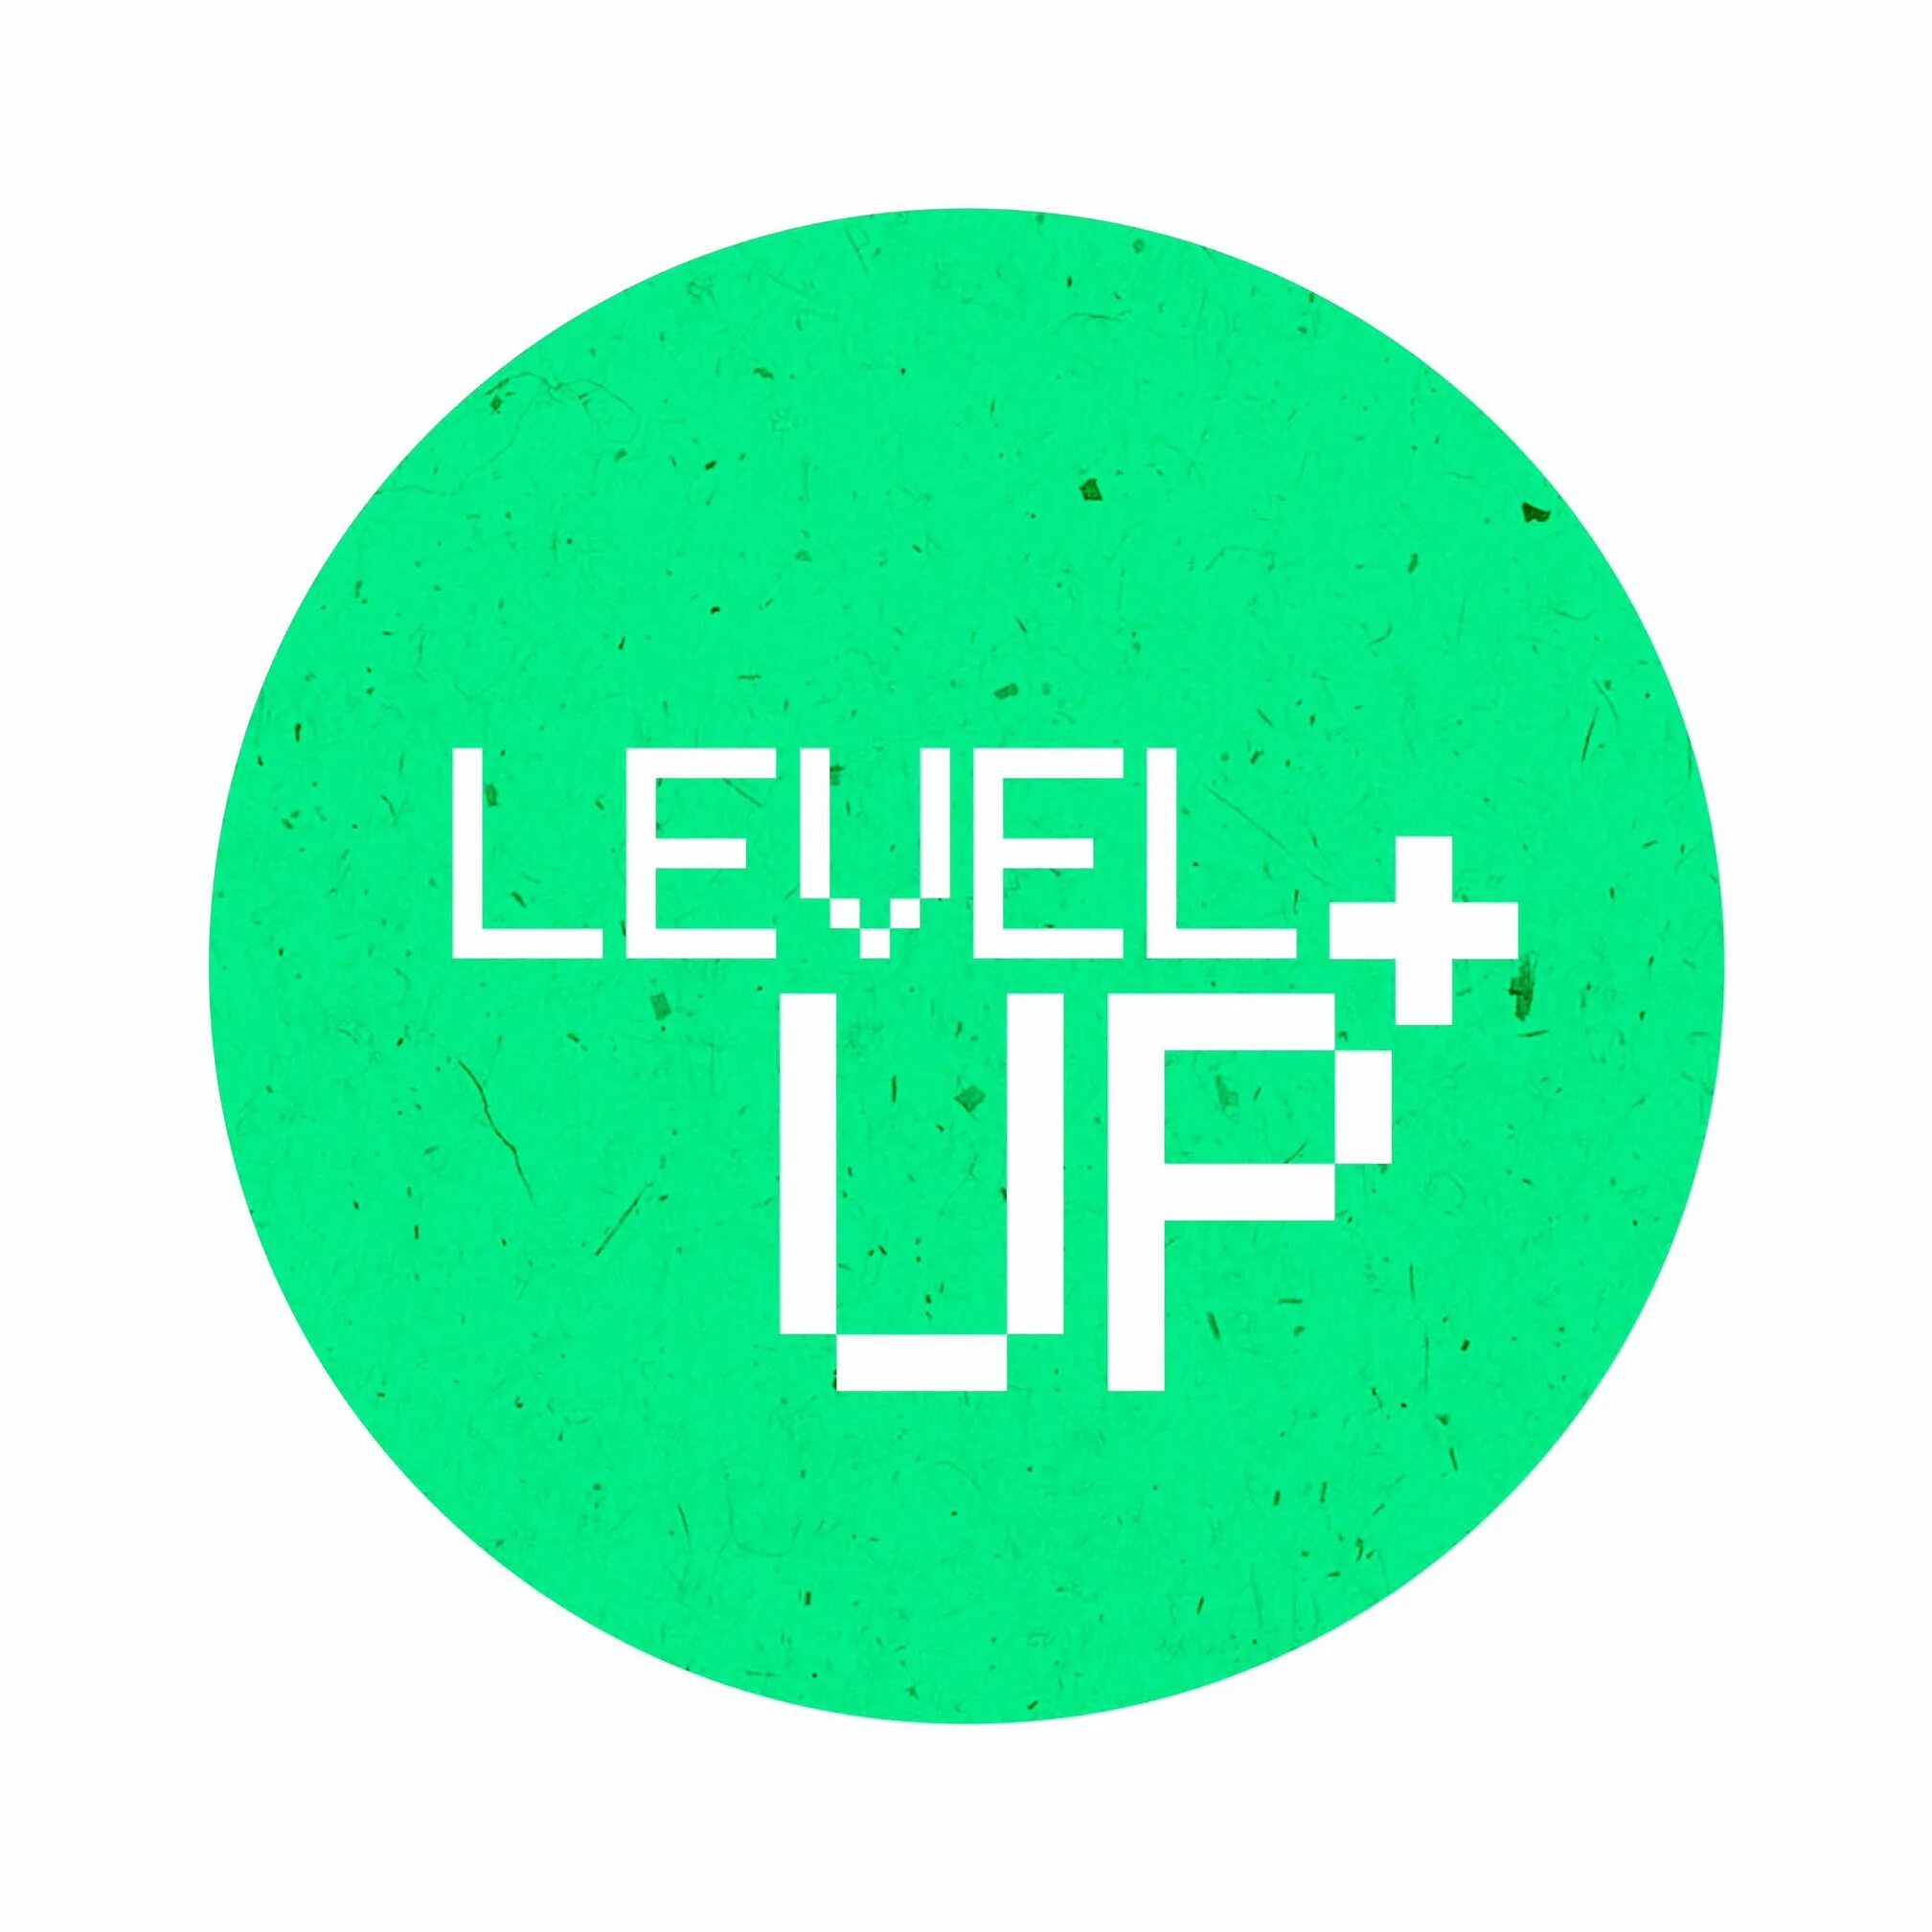 How to level up. Level up!. Значок лвл ап. Надпись лвл ап. Лвл ап картинка.